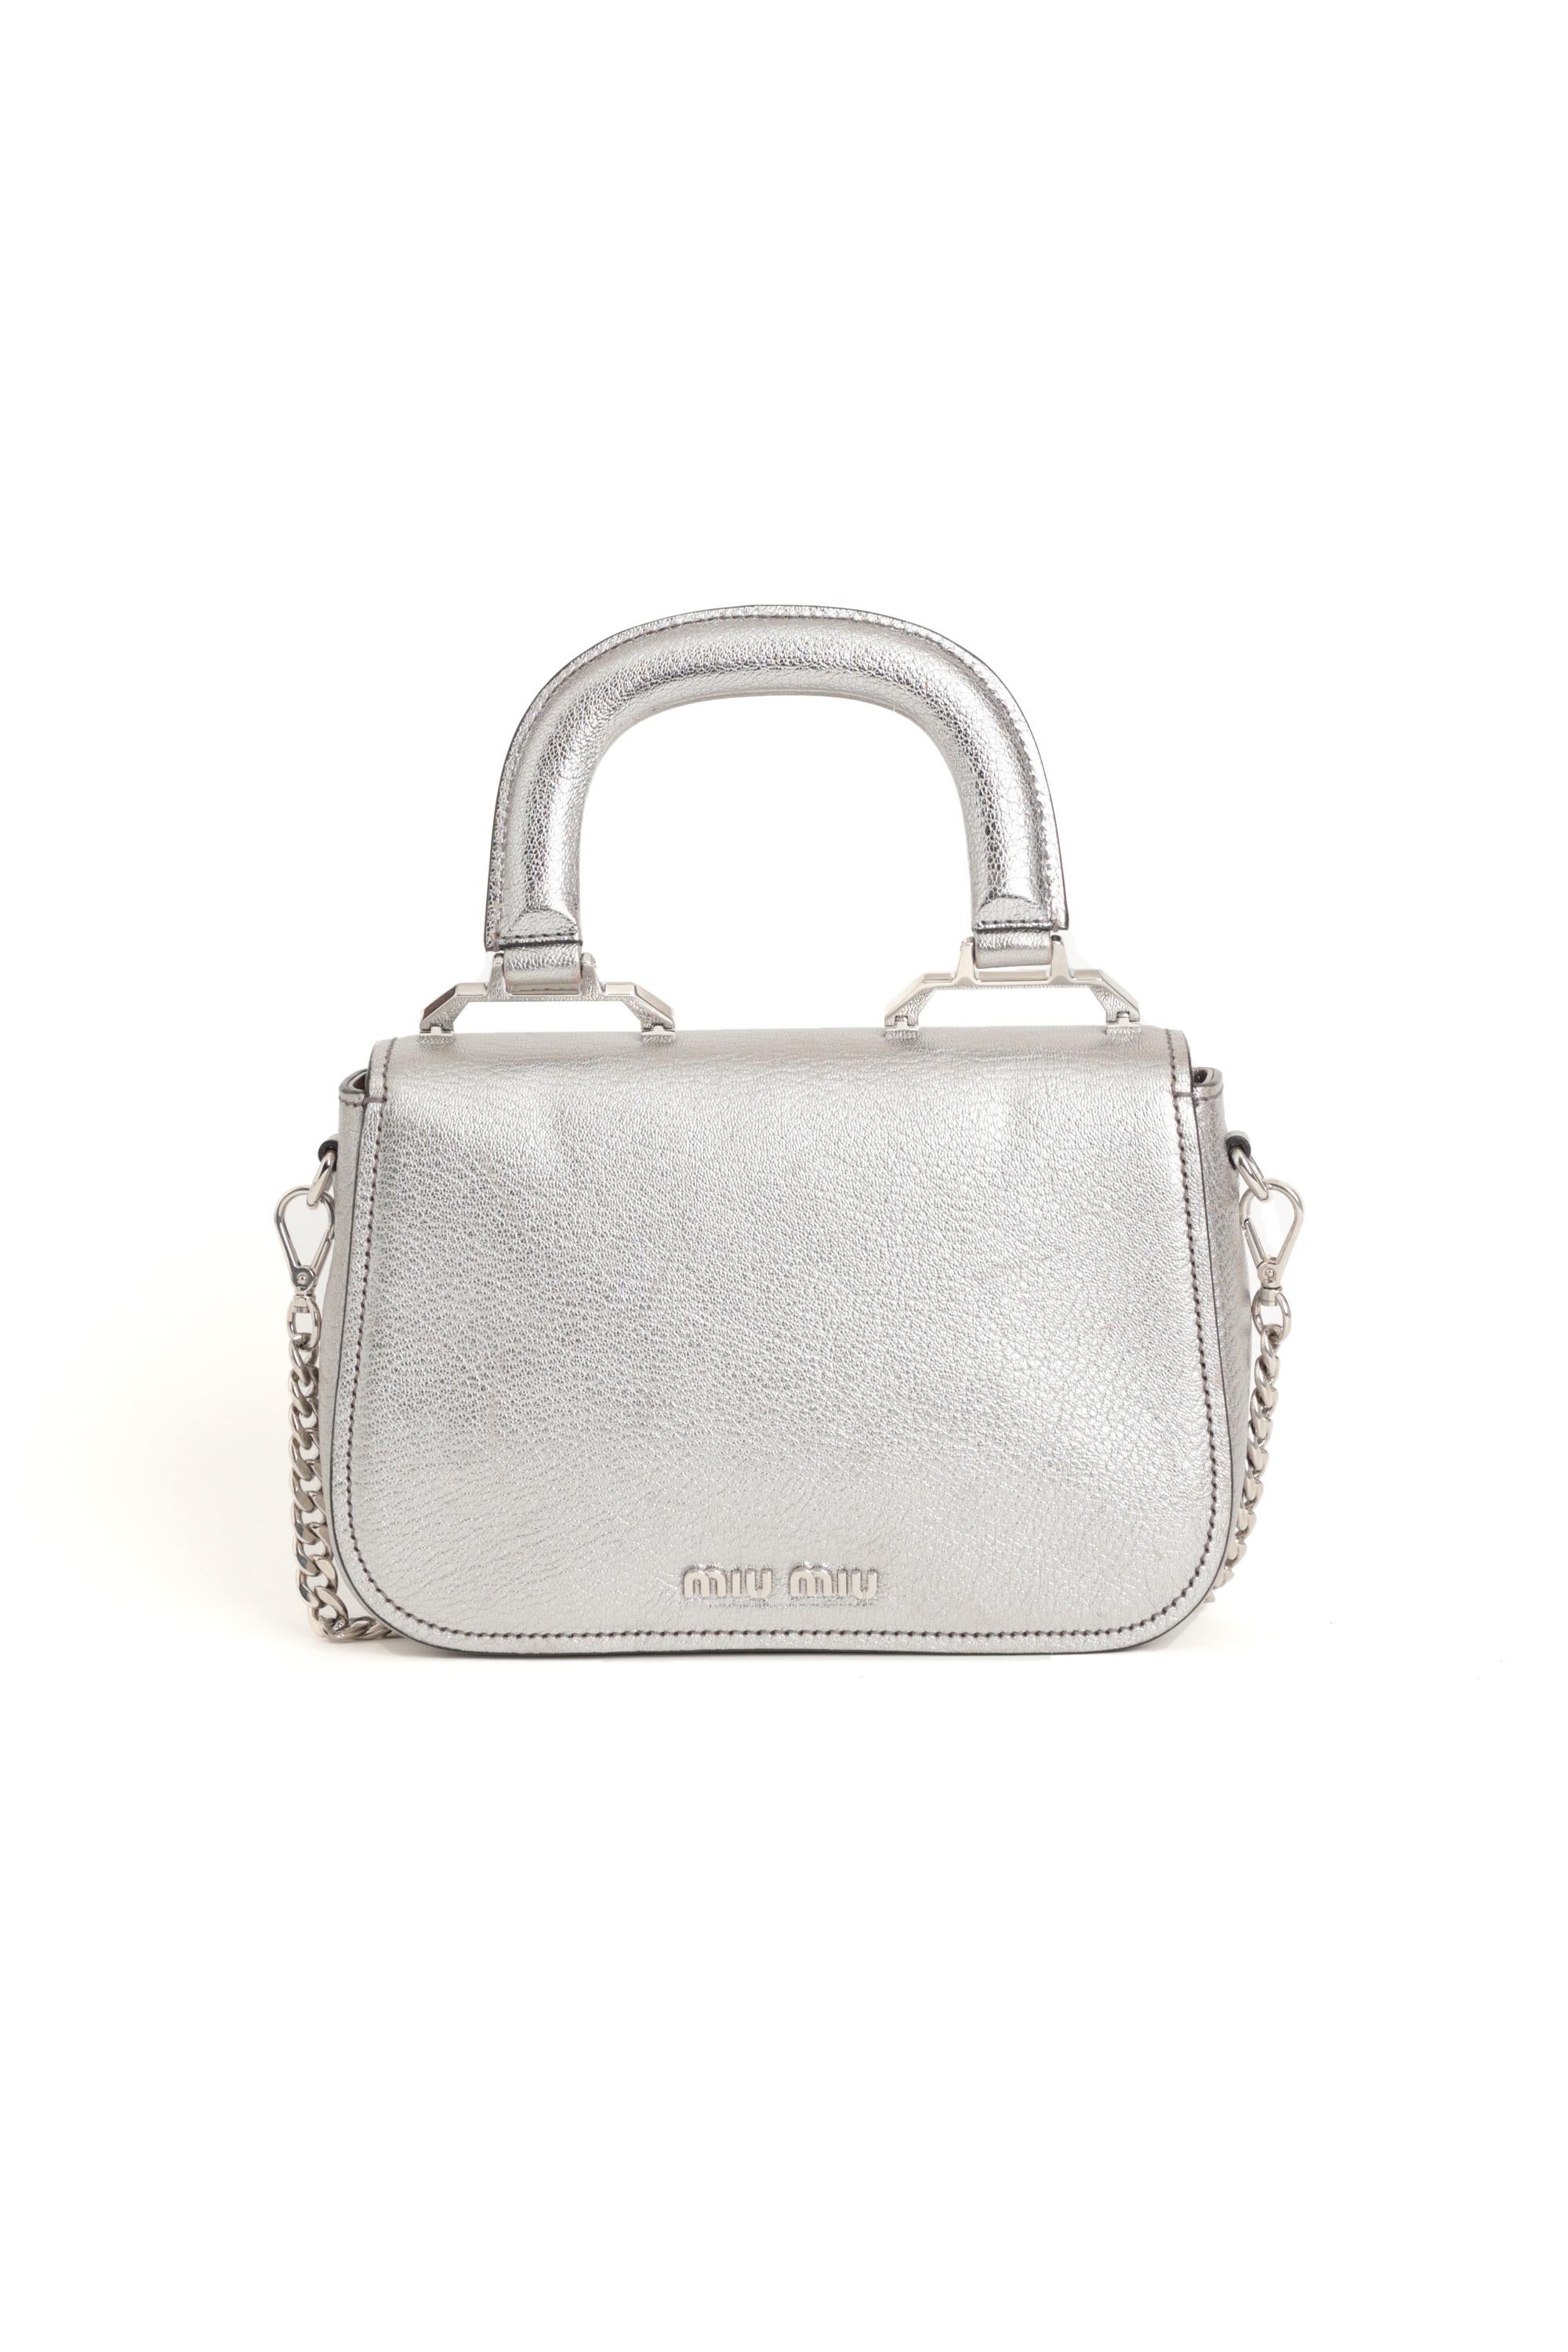 We are excited to present this lovely Miu Miu 2018 Madras silver Handbag with a removables silver  crossbody chain. Features silver hardware flap and lock popper closure and inside zip pocket. Pre-loved, in excellent condition. Authenticity